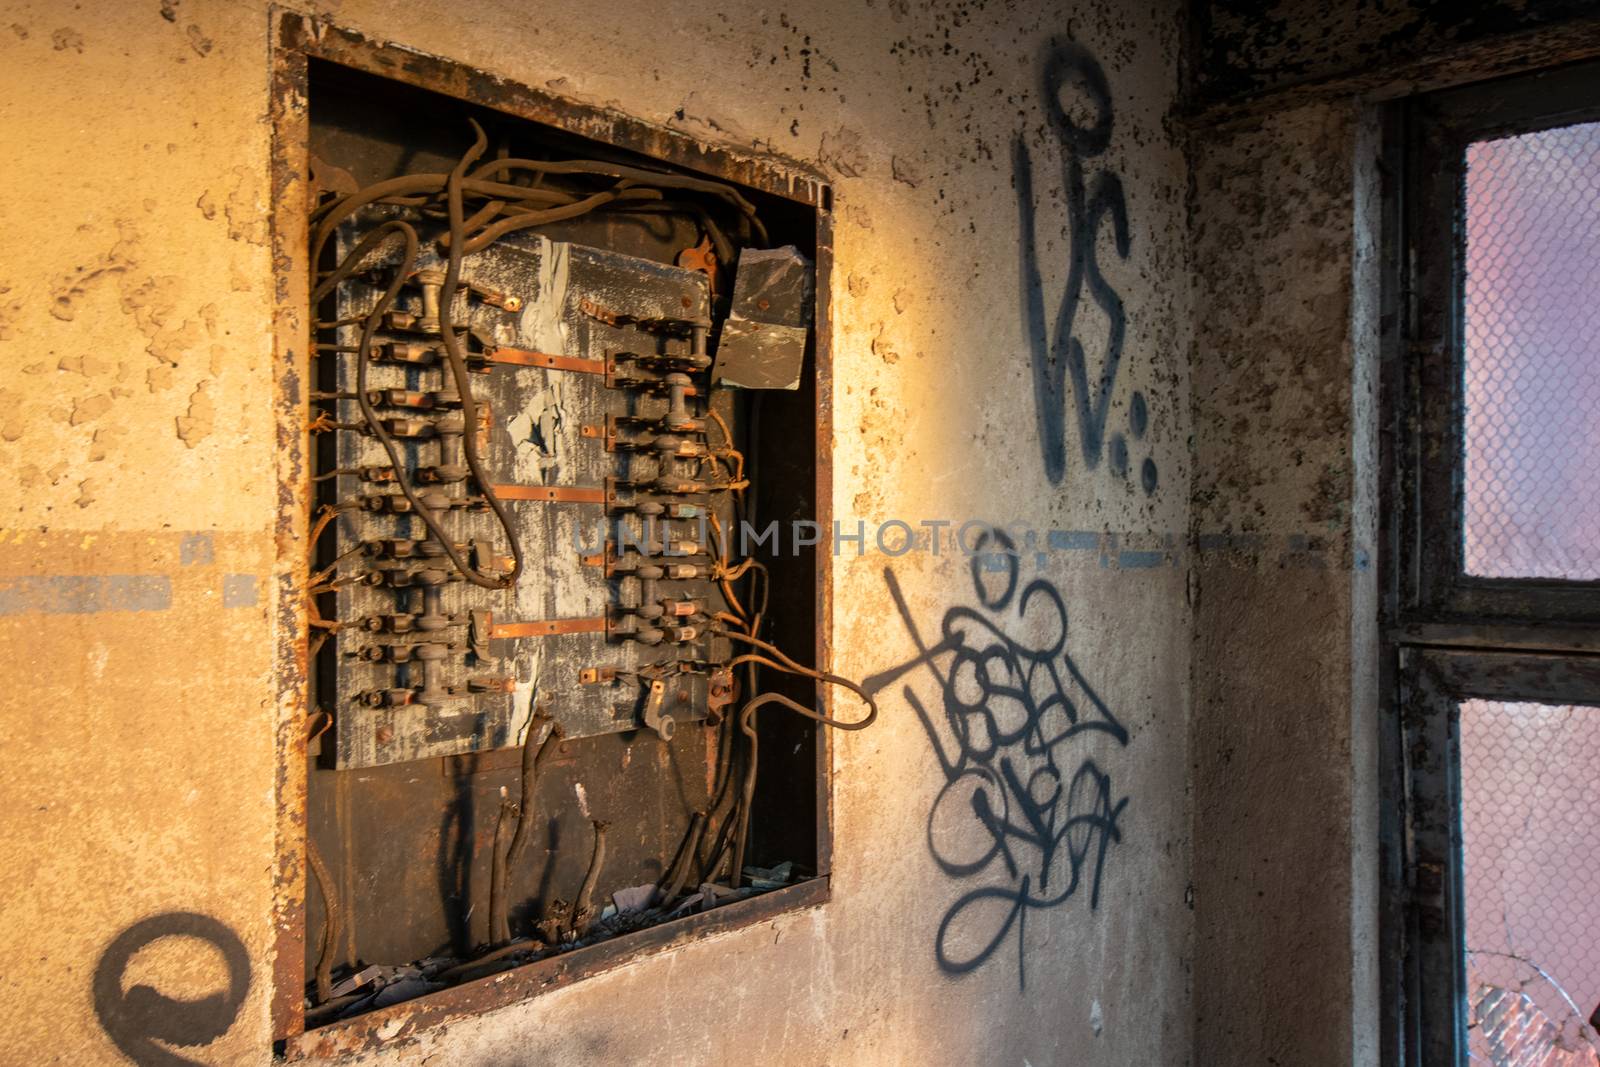 An Old and Rusty Electrical Panel in an Abandoned Building